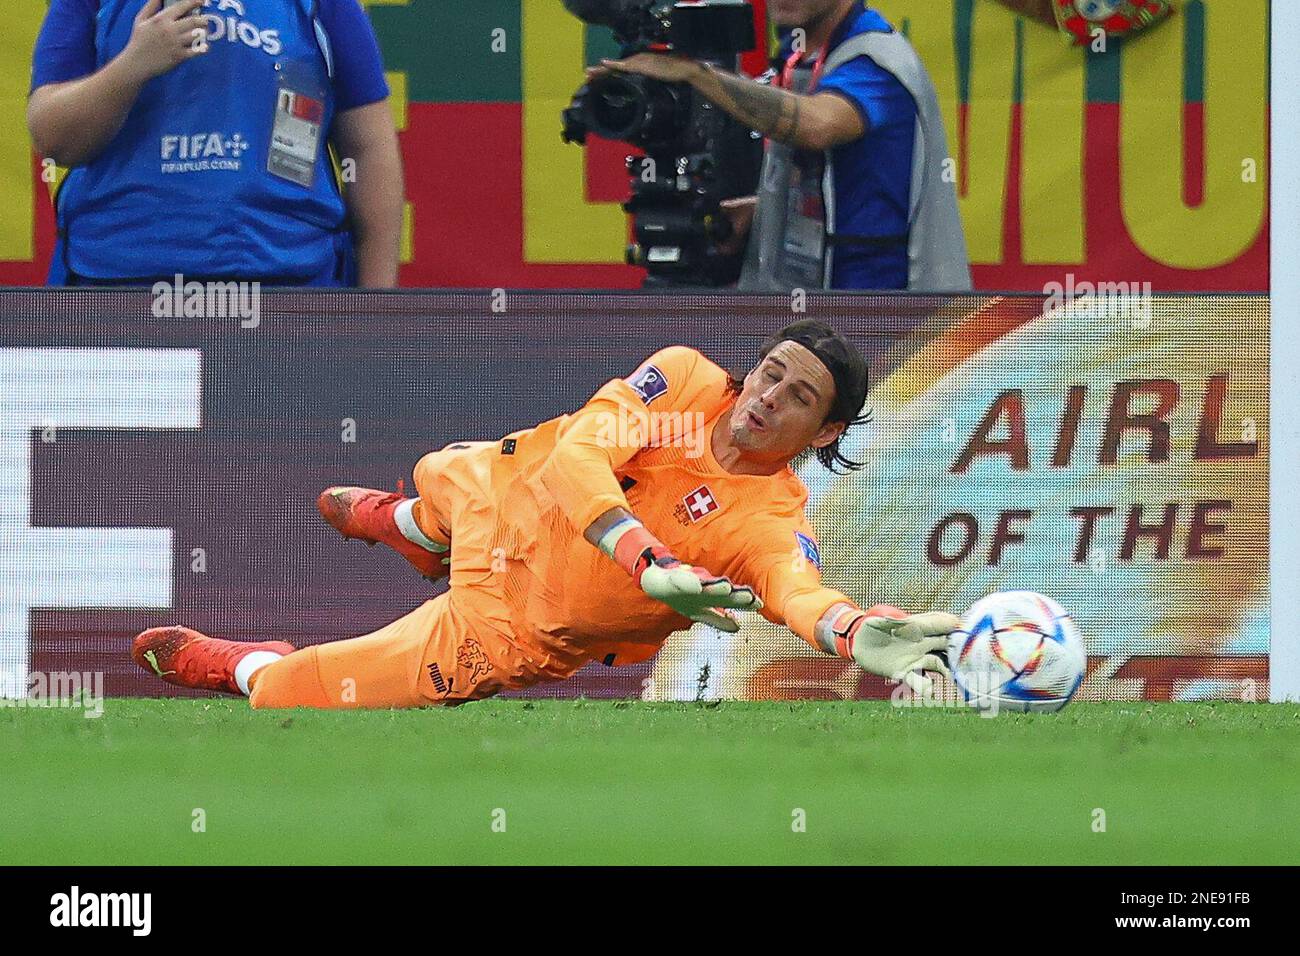 LUSAIL CITY, QATAR - DECEMBER 06: Yann Sommer during the FIFA World Cup Qatar 2022 Round of 16 match between Portugal and Switzerland at Lusail Stadium on December 6, 2022 in Lusail City, Qatar. (Photo by MB Media) Stock Photo